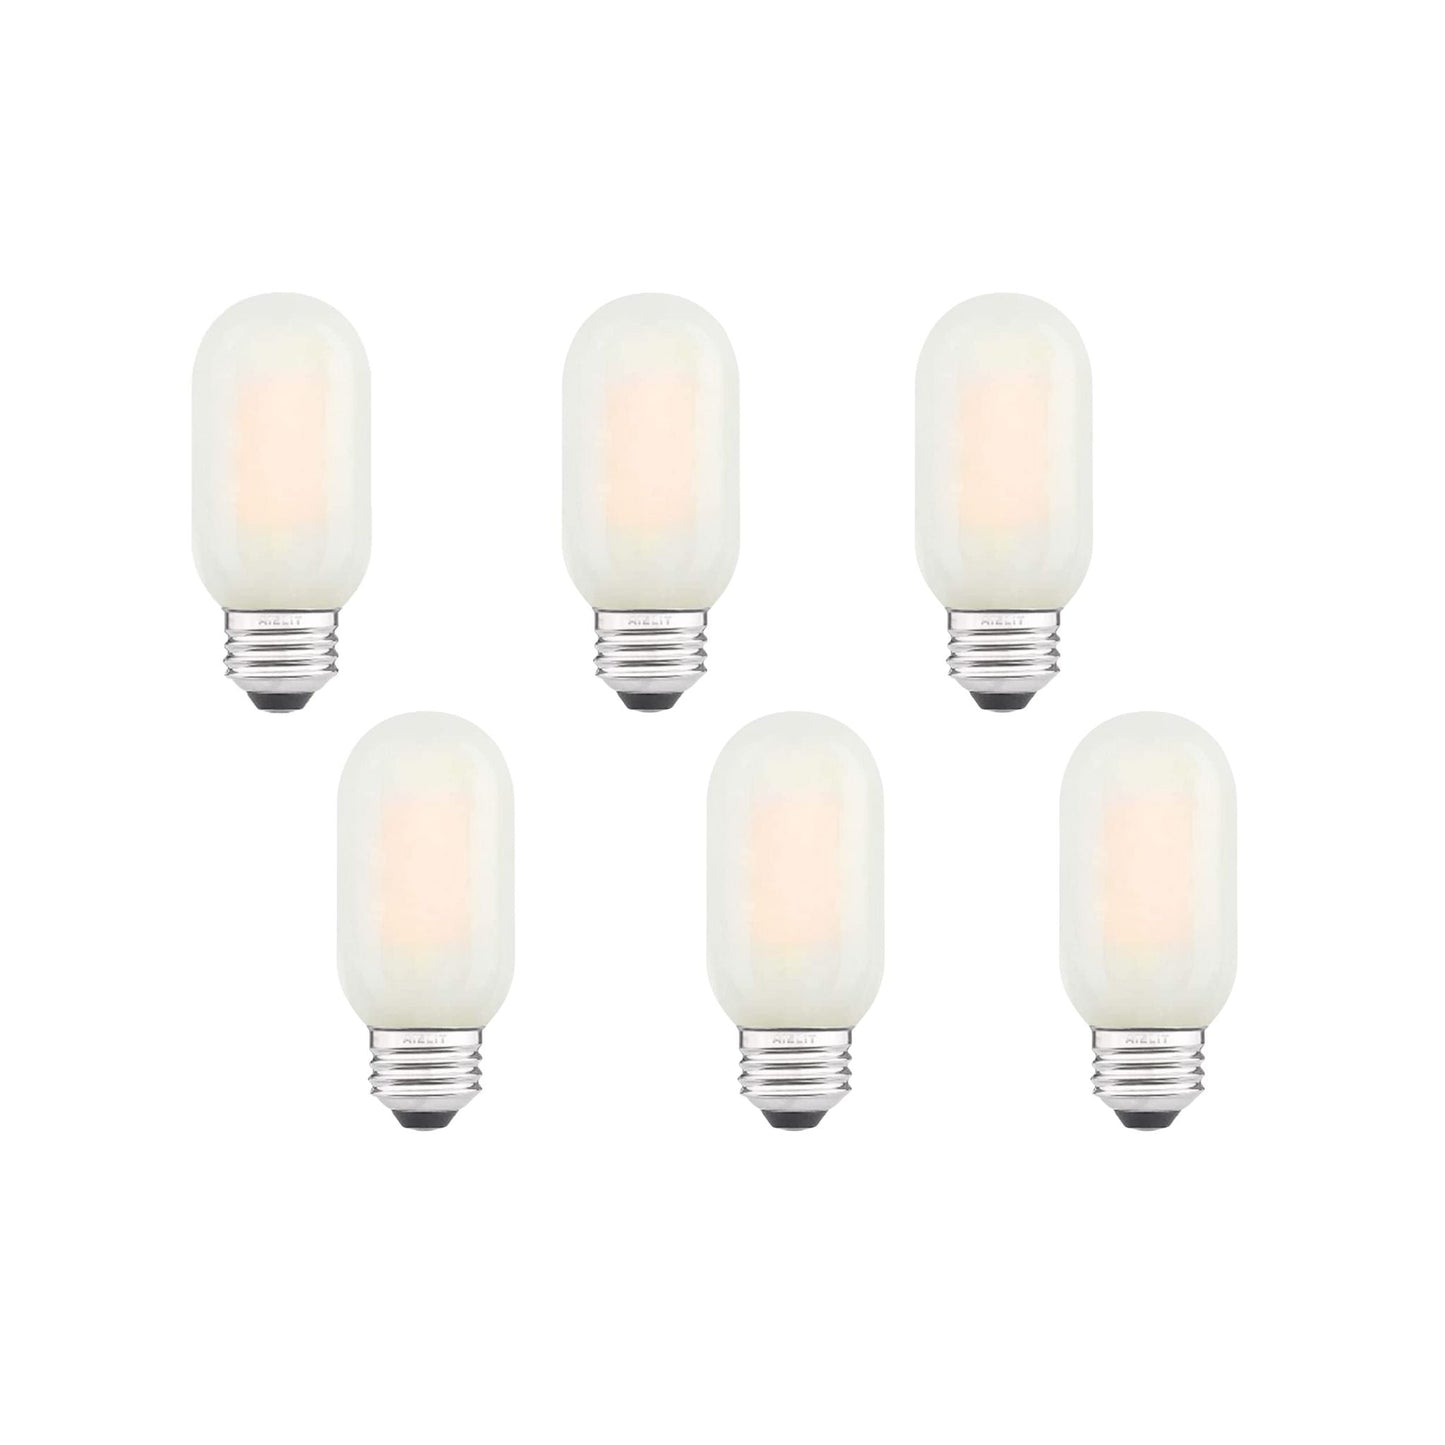 8 Watt Frosted Dimmable Filament Bulb - 2700k-Lightbulb-Bicycle Glass Co - Hardware-Six Bulb Pack-Bicycle Glass Co